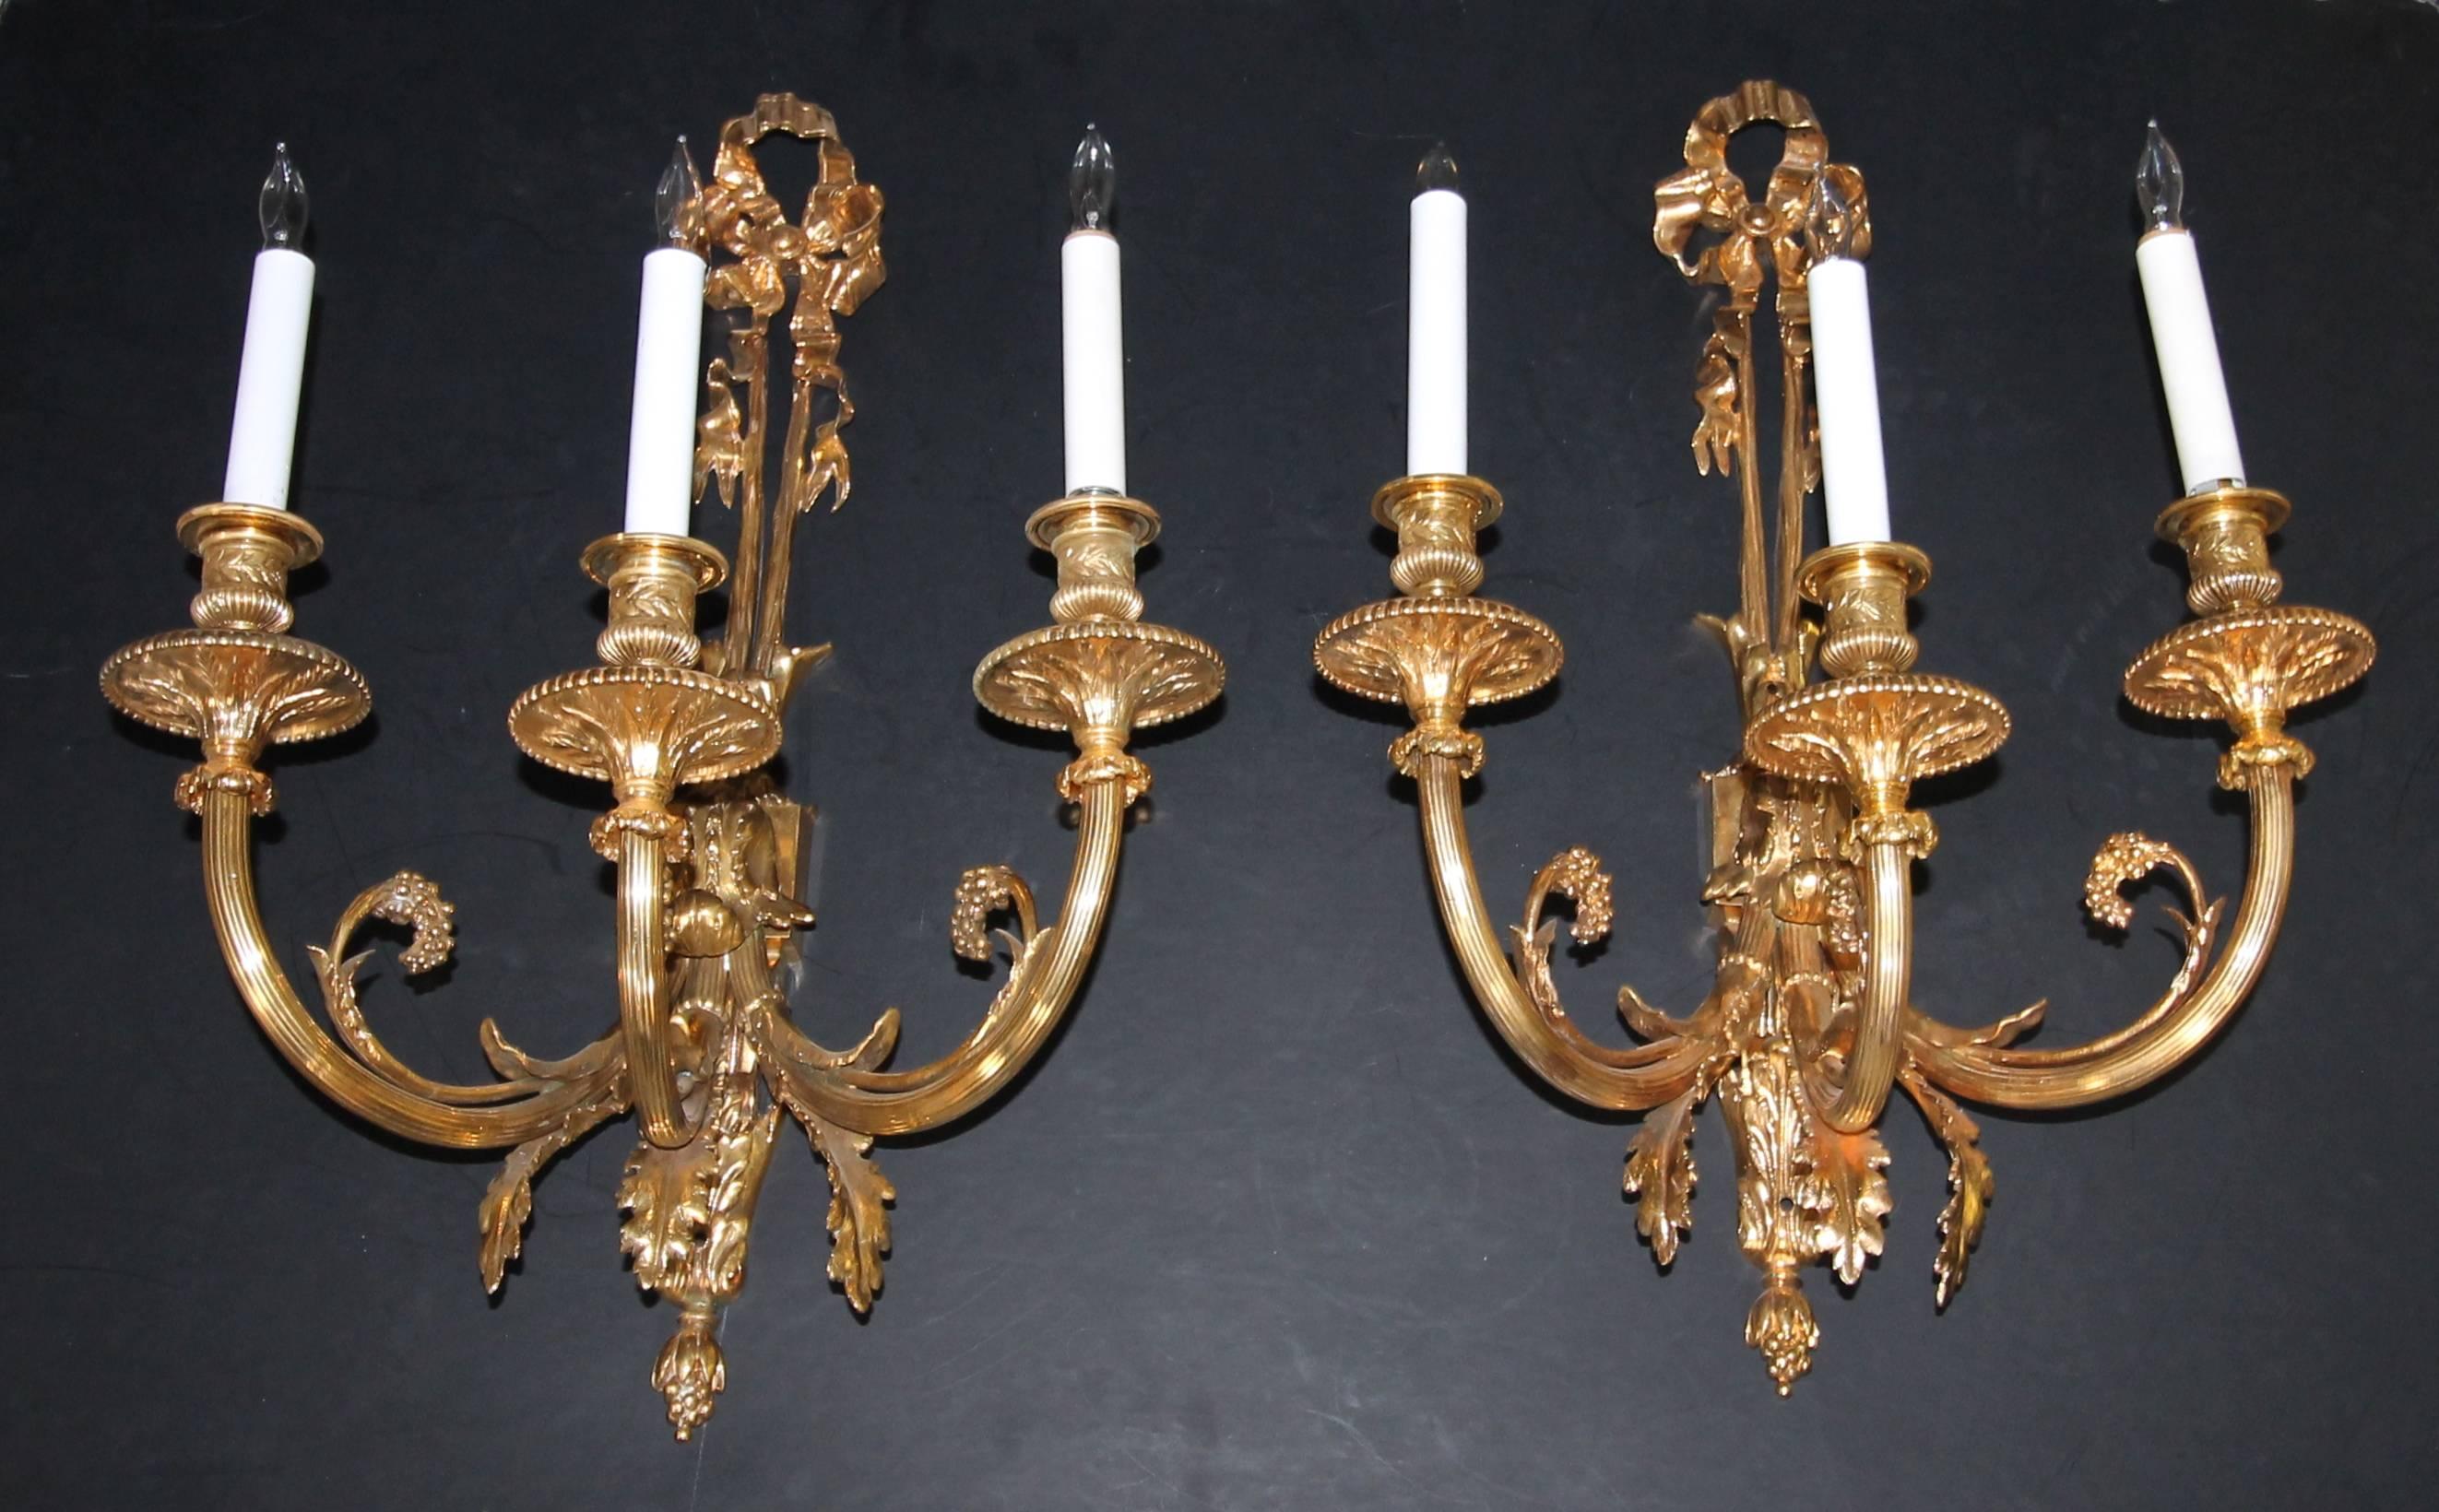 Pair of large three-light French neoclassic style bronze or brass wall sconces.